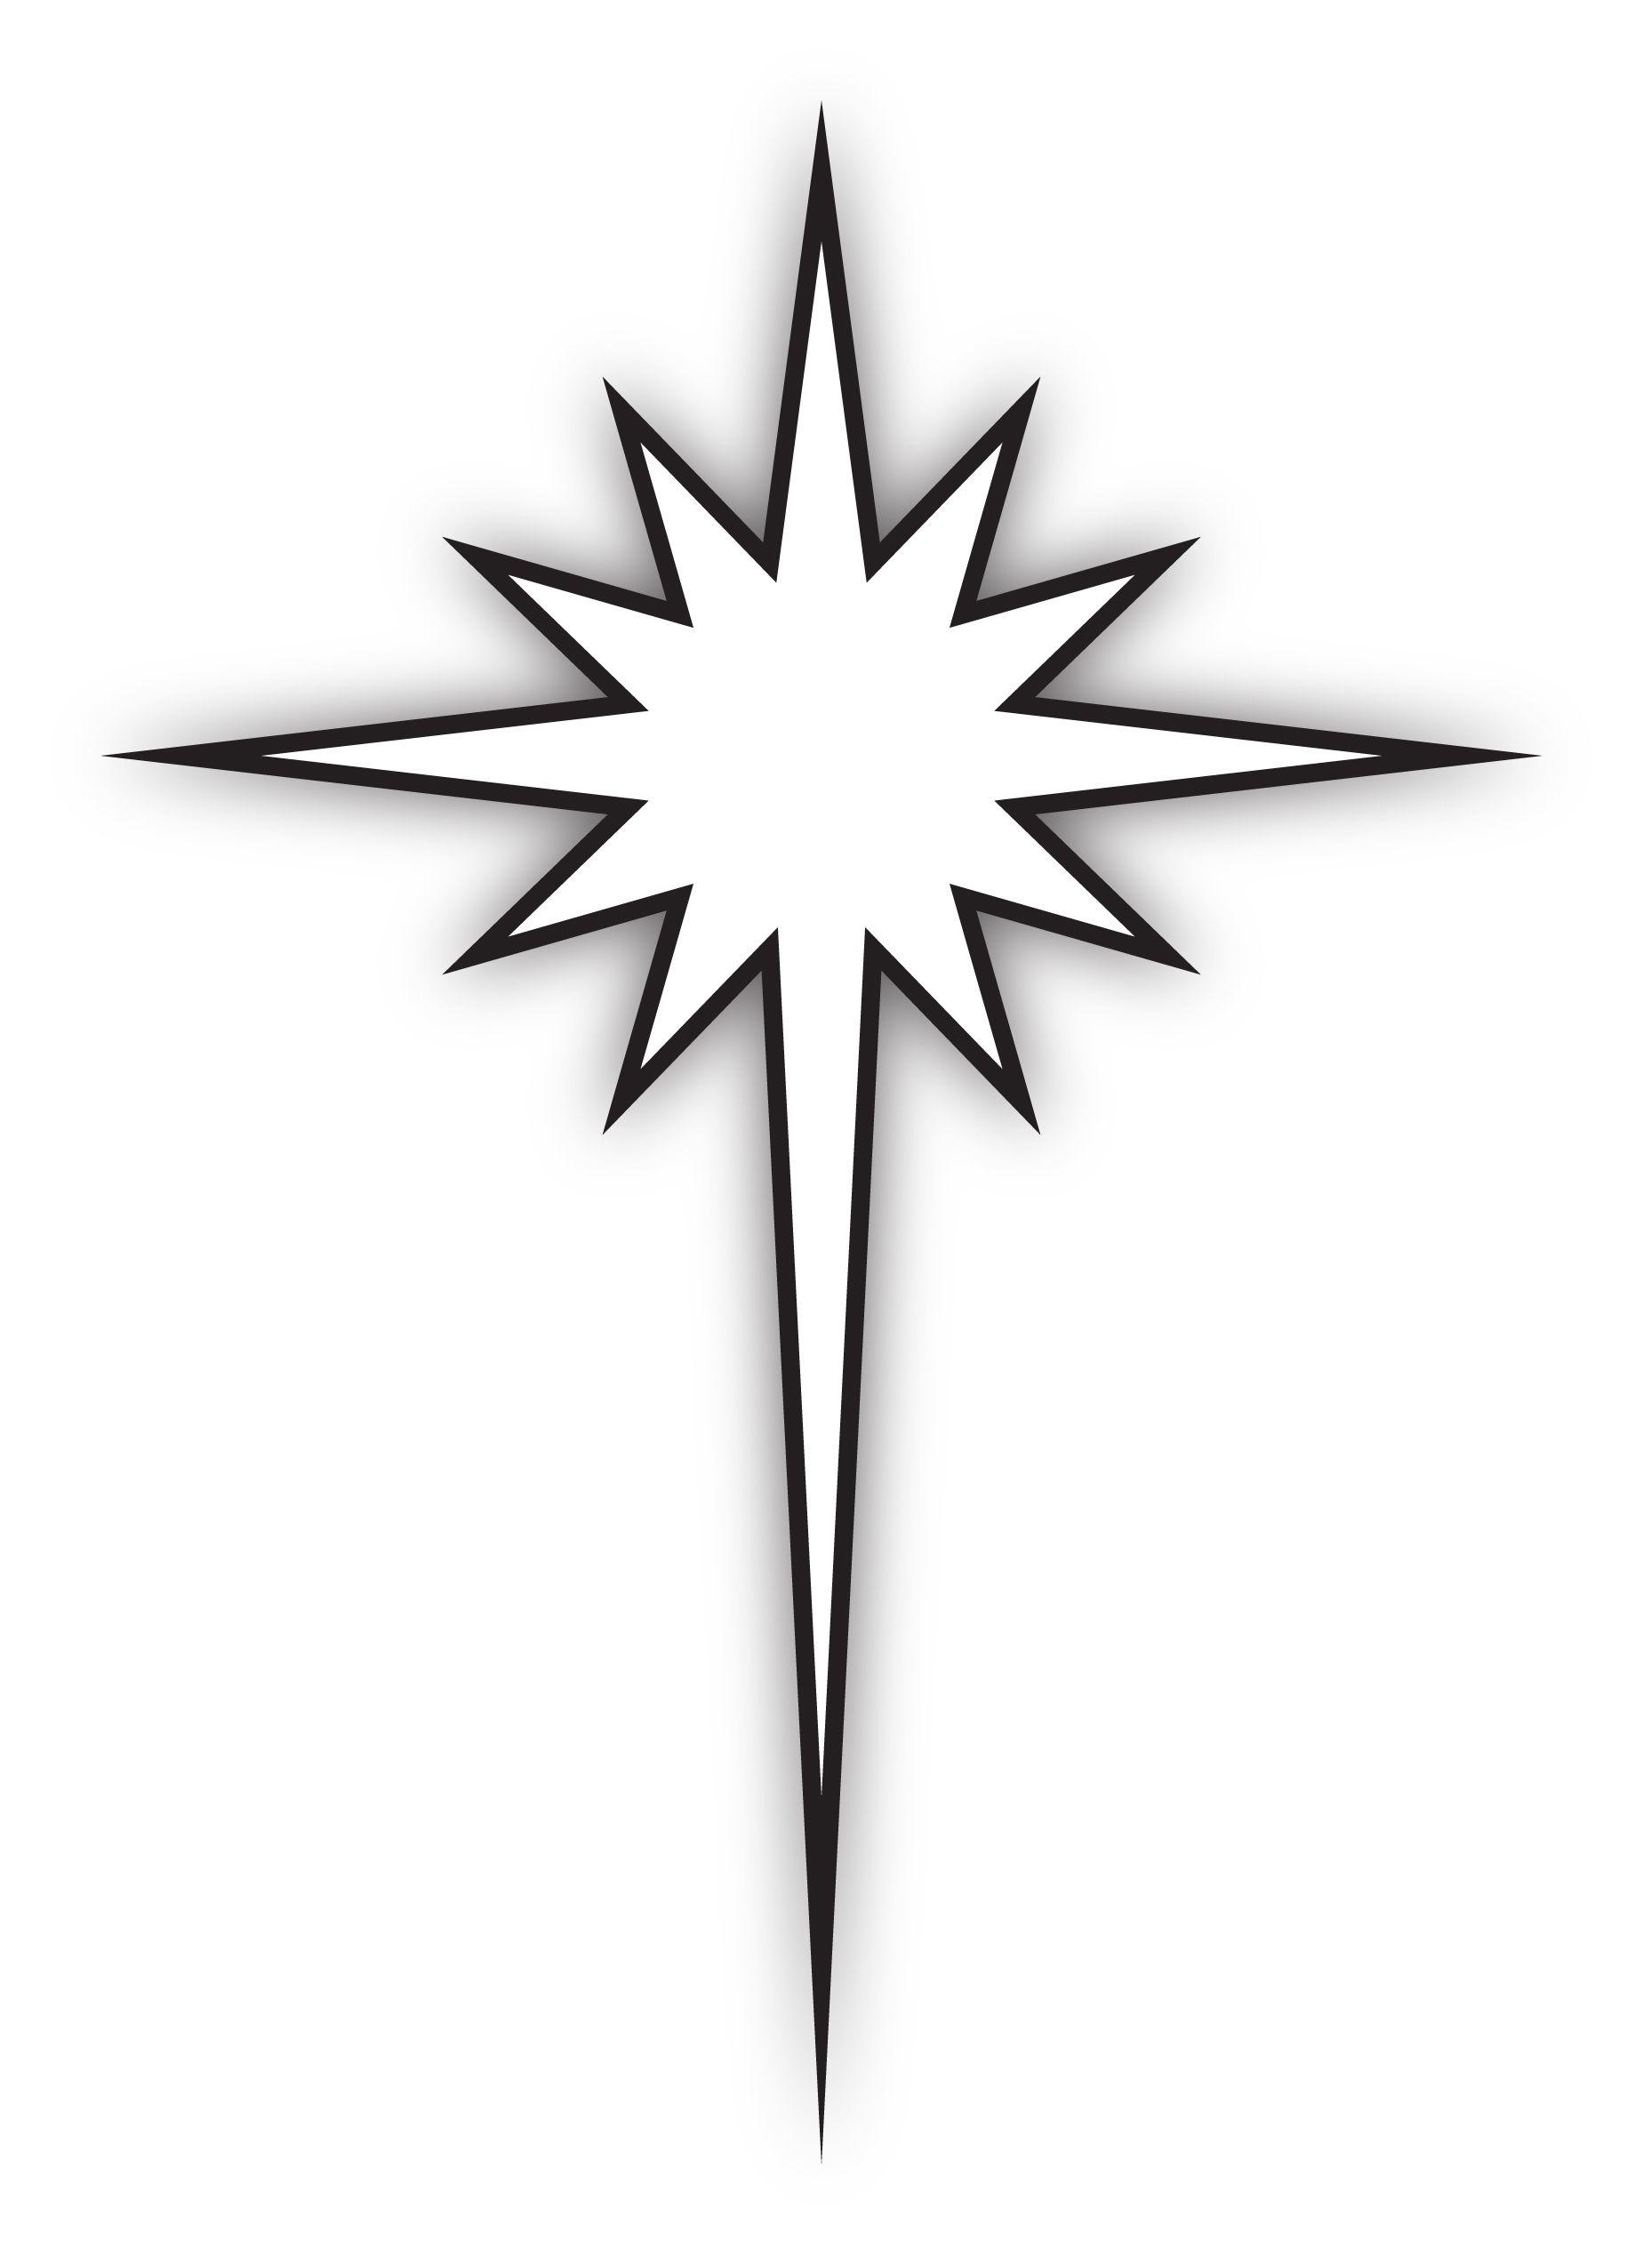 Star Cross Logo - About Our Logo